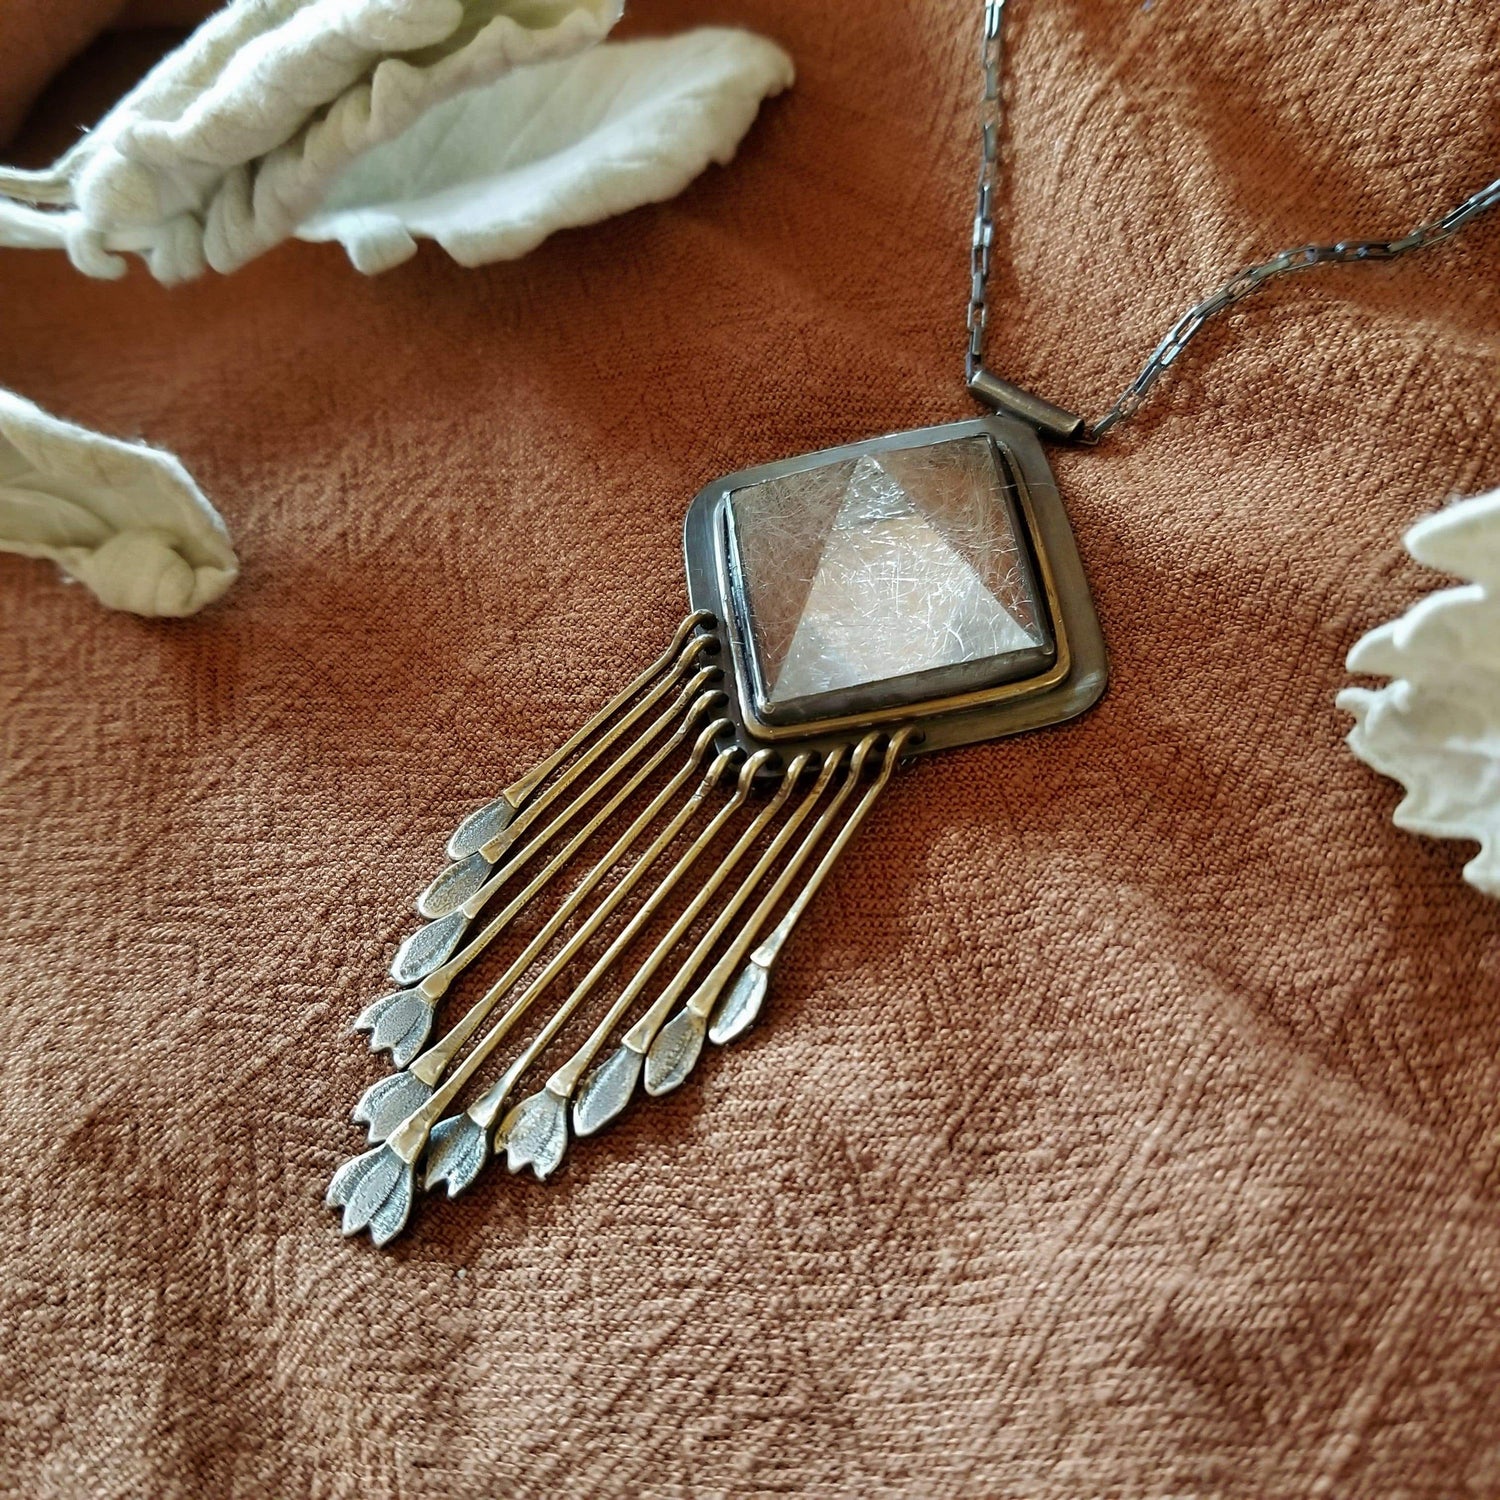 Handmade one of a kind necklace with rutilated quartz set in sterling silver and brass with eleven hand engraved snowdrop flower fringe dangles. All hanging on a sterling silver chain. 